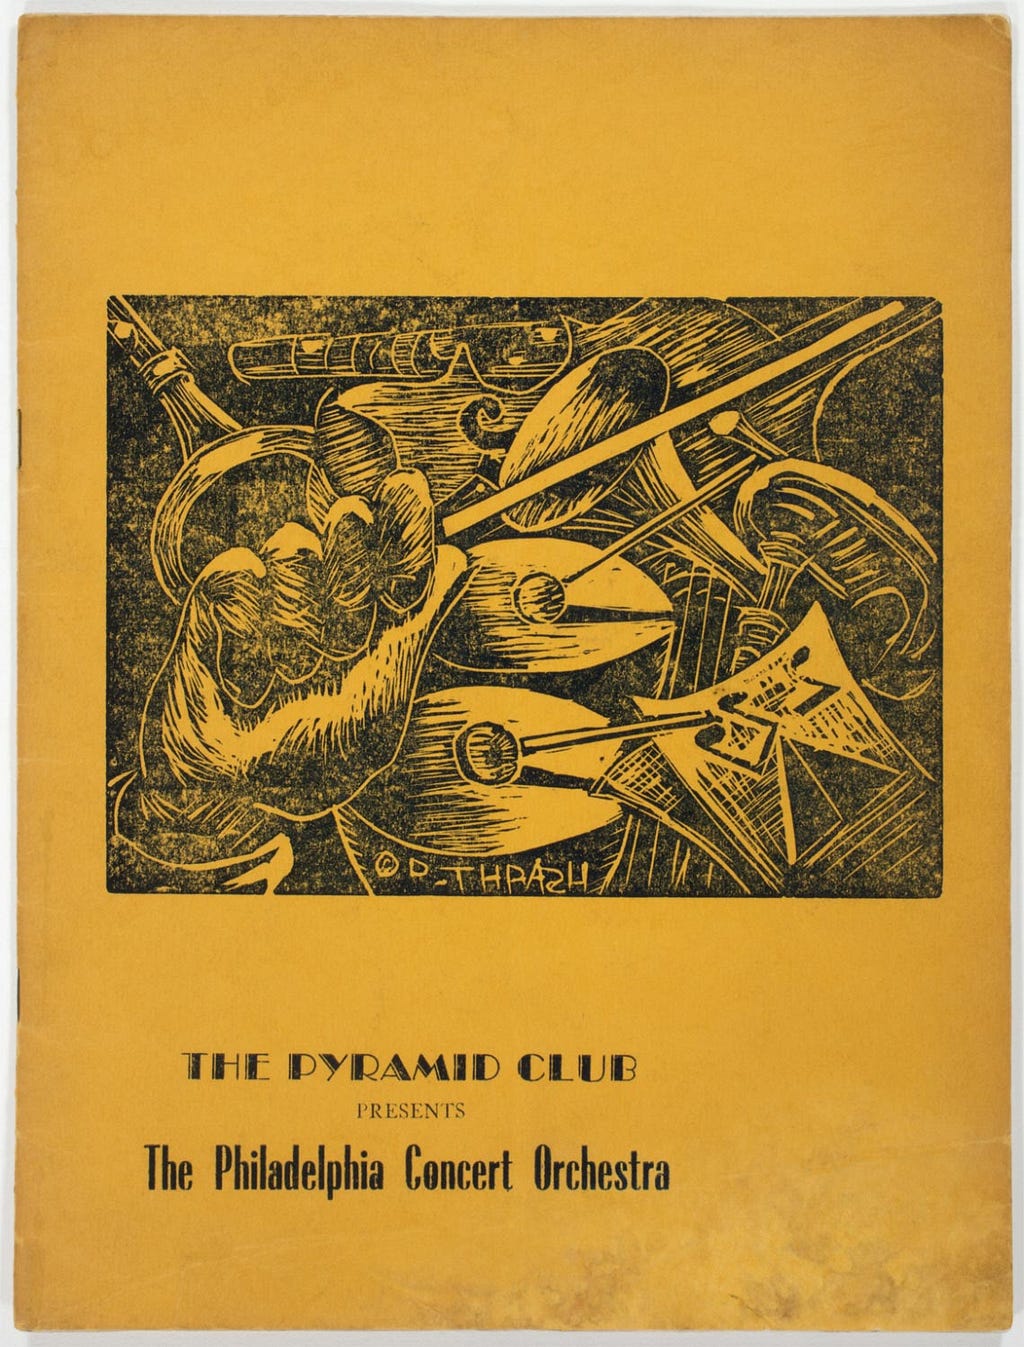 A print done by Dox Thrash for a concert at the Pyramid Club showing horns and drums